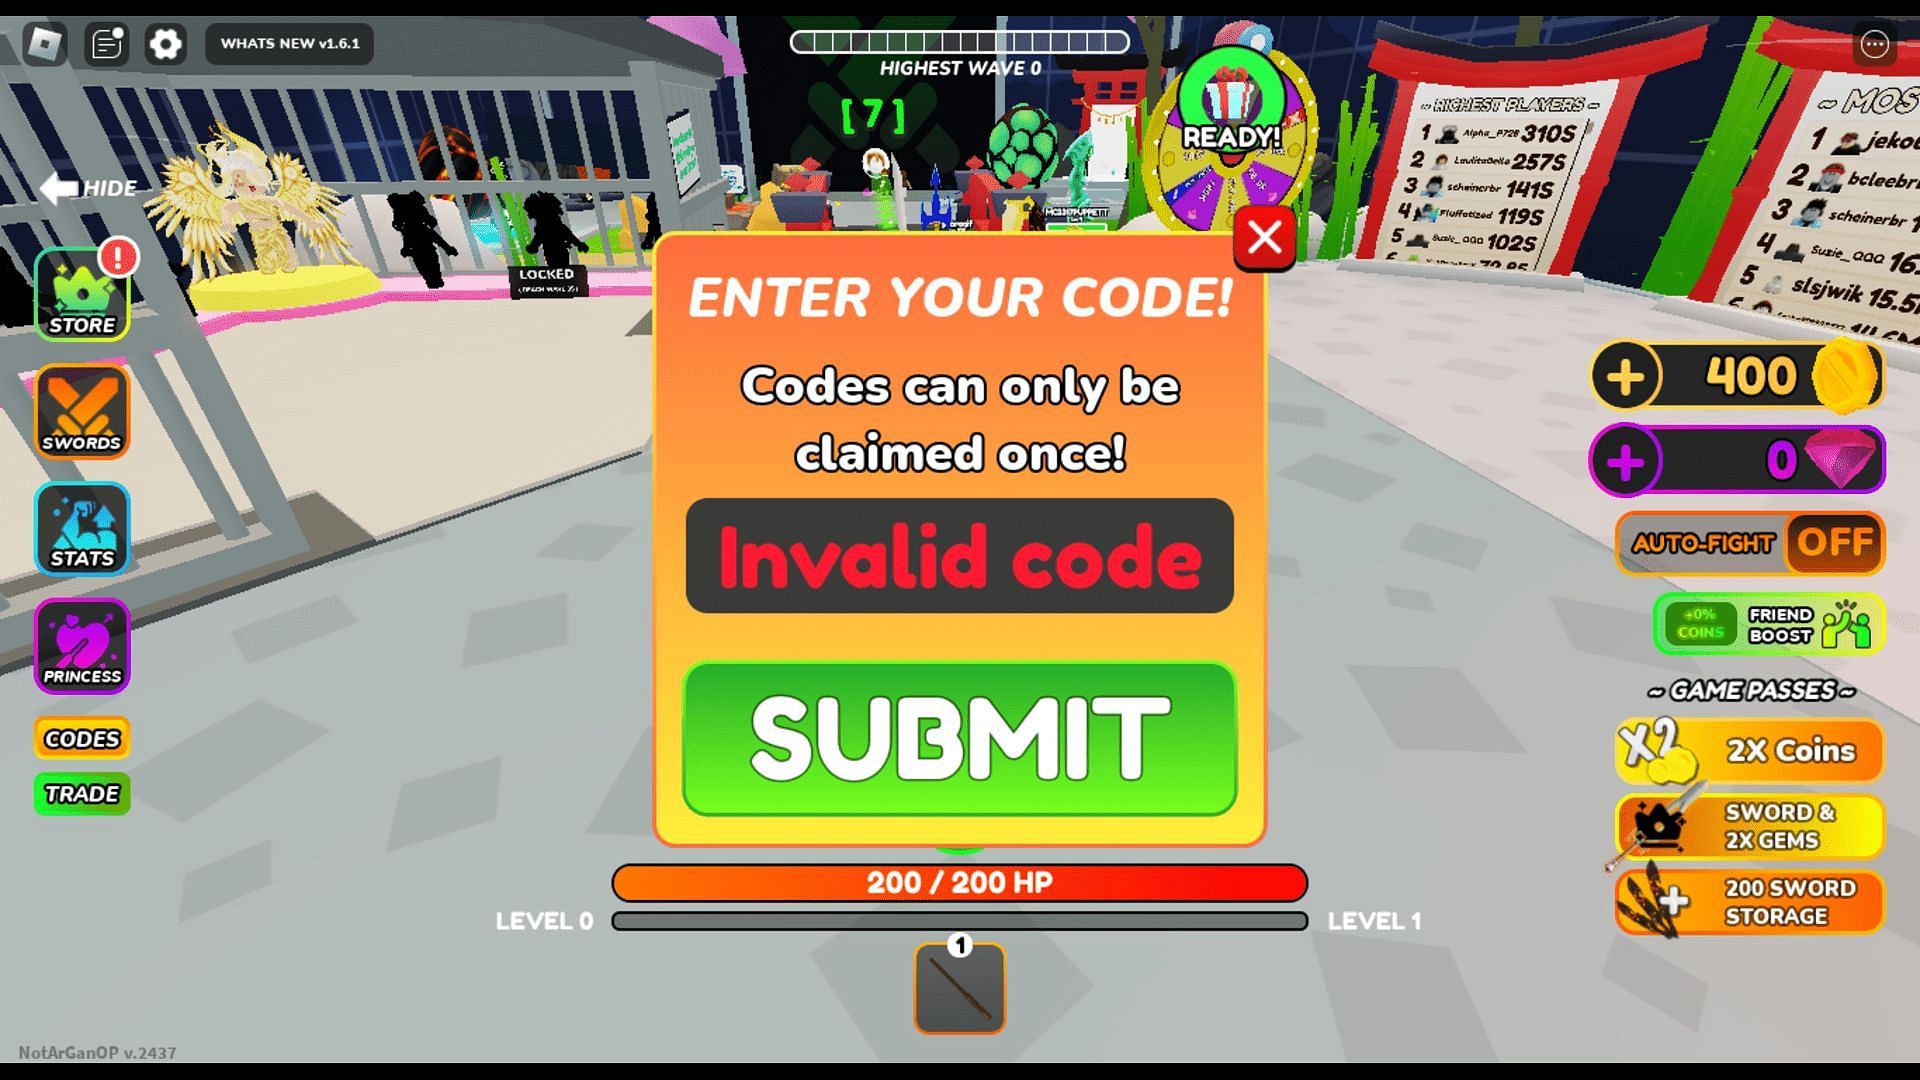 Troubleshoot codes in Anime Blade Universe (Image via Roblox)